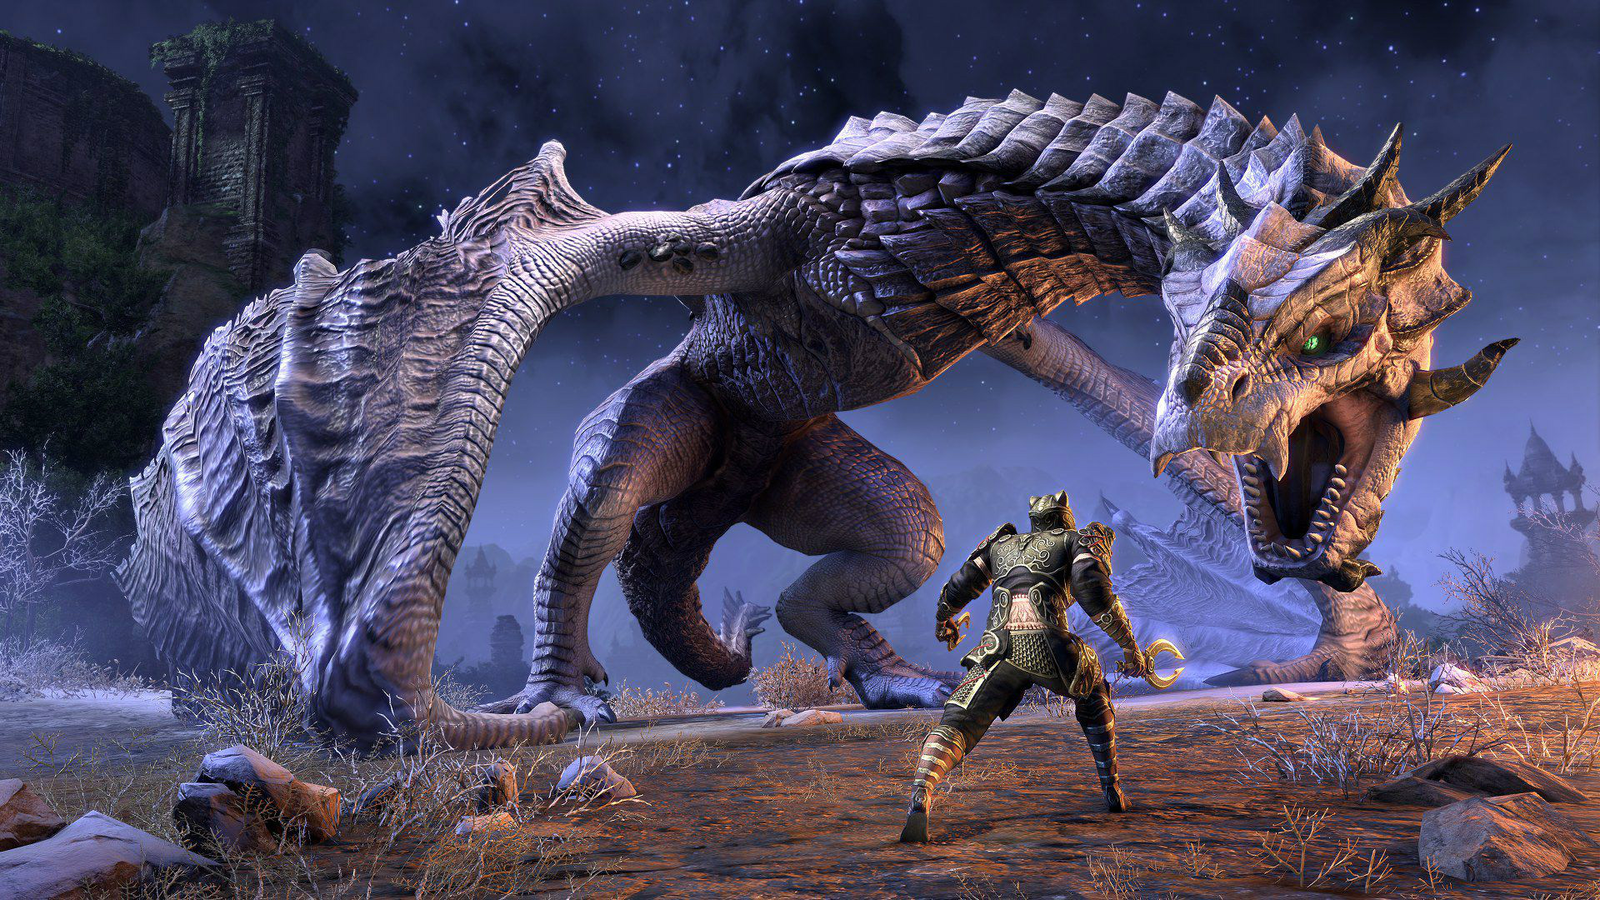 The Elder Scrolls Online Unveils Details About Necrom and Roadmap